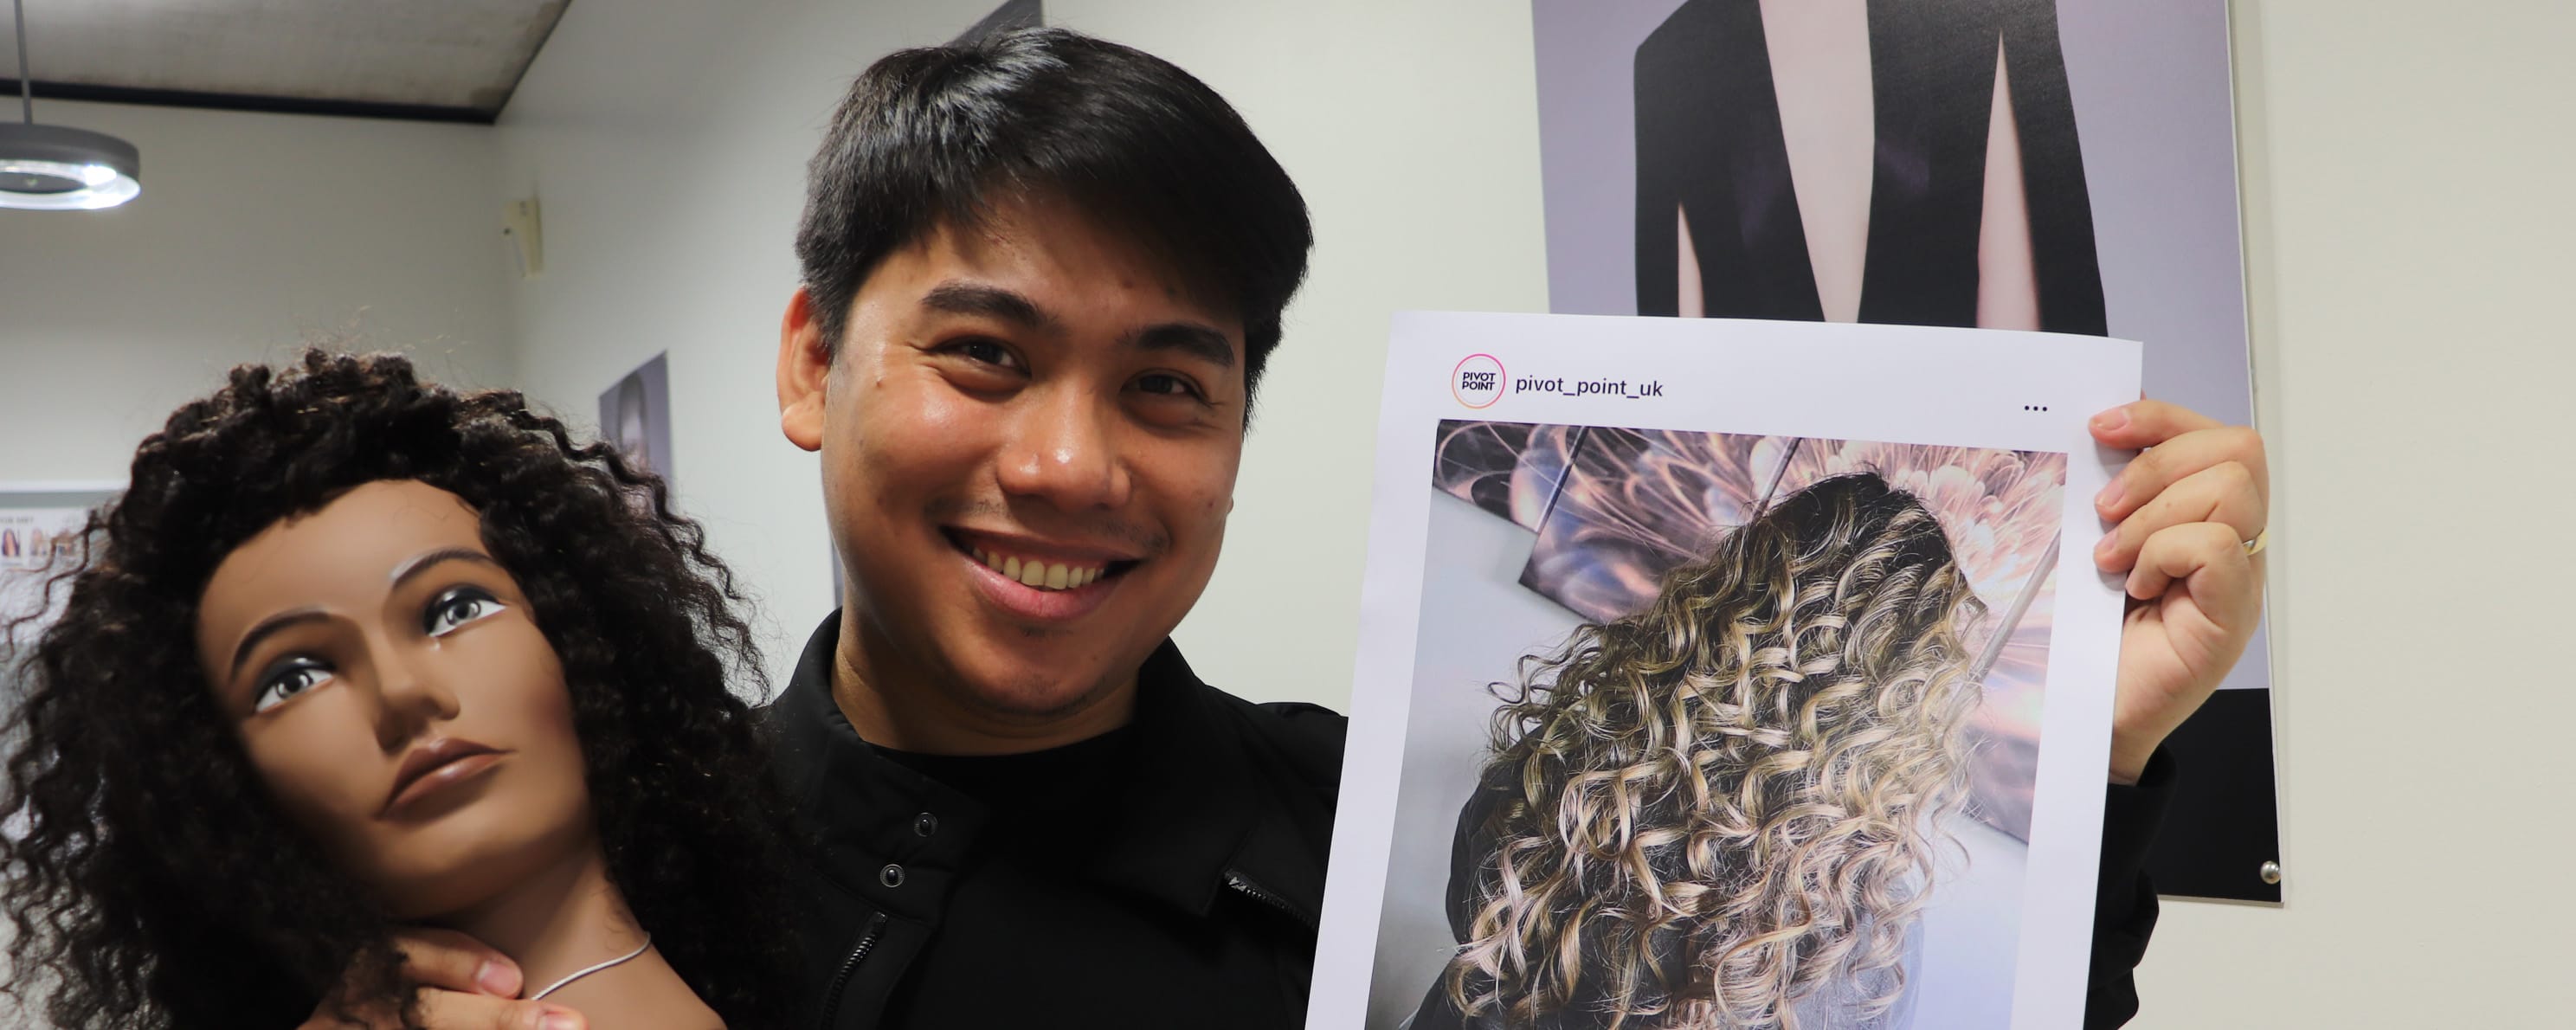 male student hairdresser holding instagram post screenshot and mannequin prize